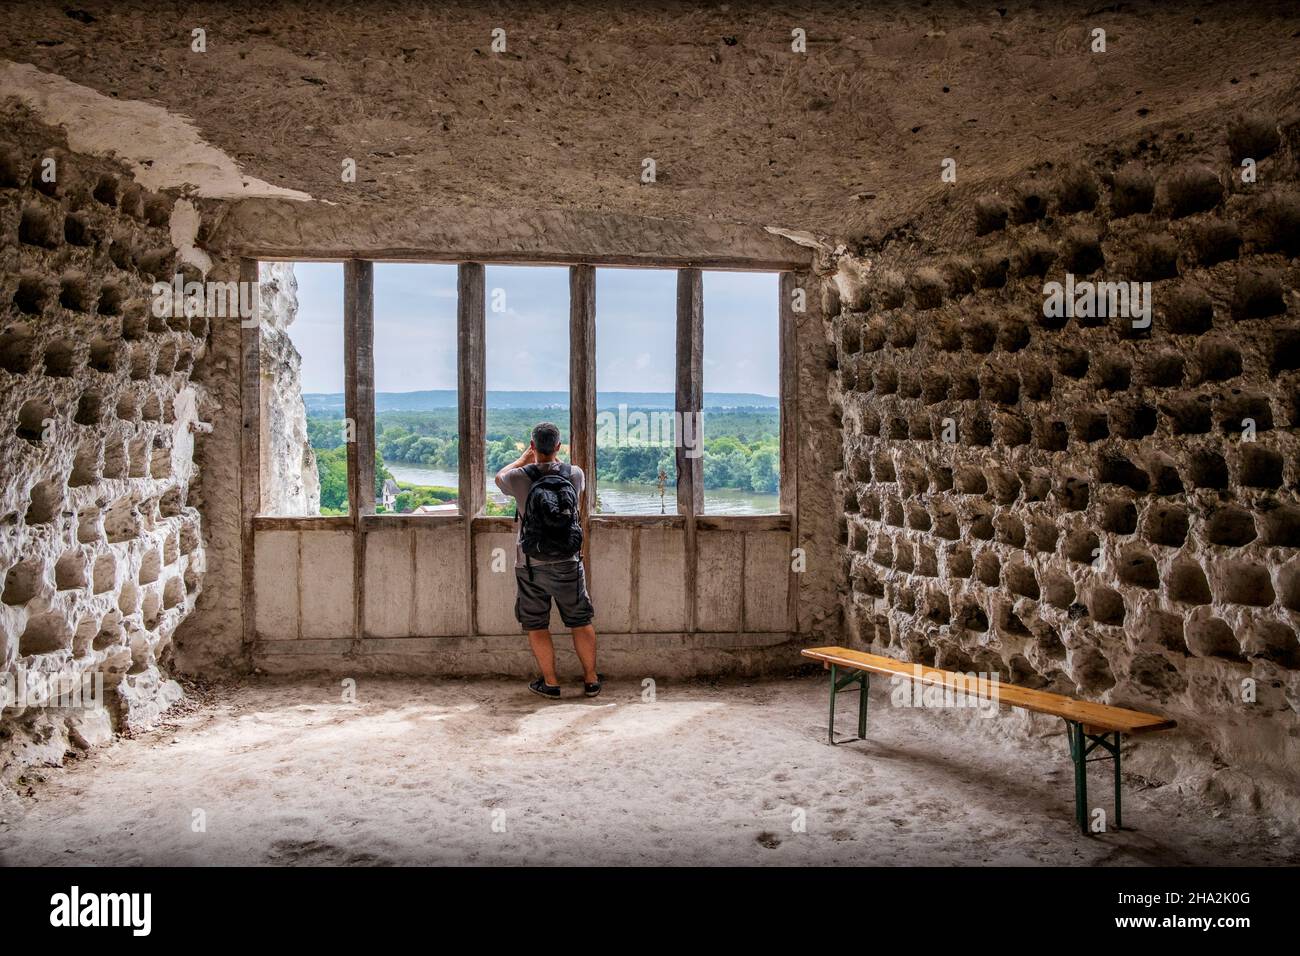 La Roche-Guyon (northern France): troglodyte dovecot of the castle dug in a limestone cliff. Man viewed from behind talking a picture of the landscape Stock Photo